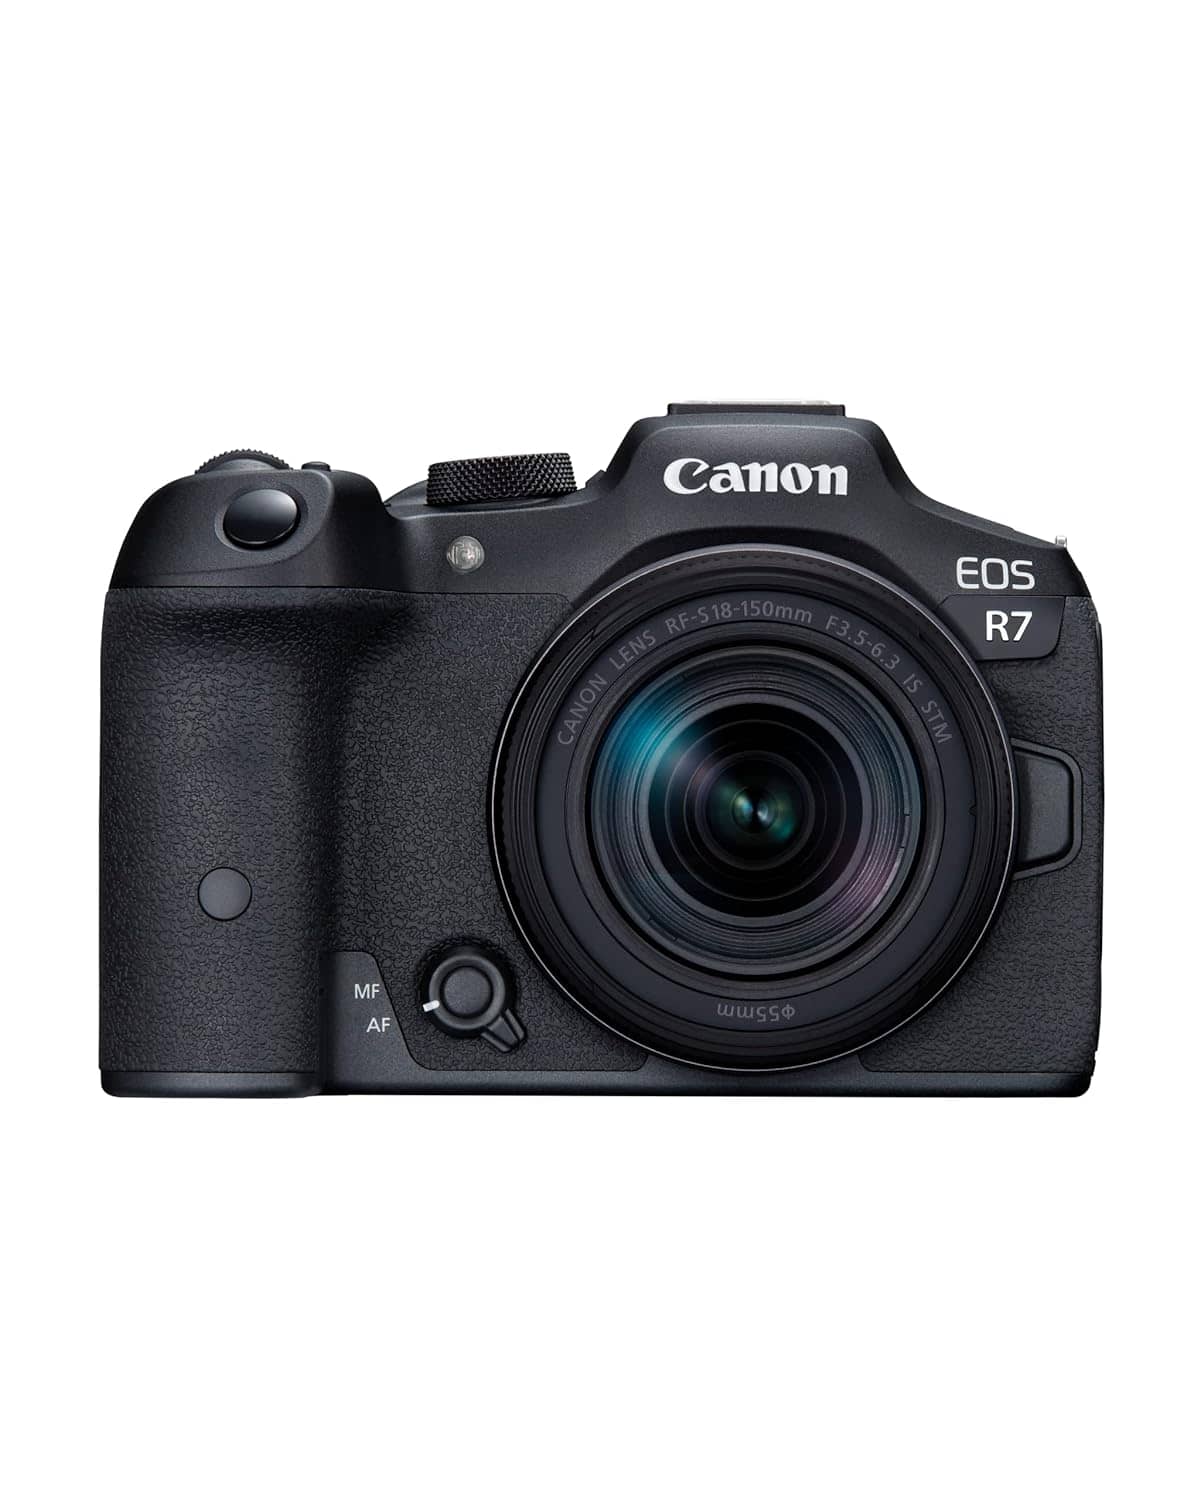 You are currently viewing Canon EOS R7 32.5MP Mirrorless Camera with RF-S18-150mm Lens Kit | APS-C Sensor | 4K 120P Video (Black)